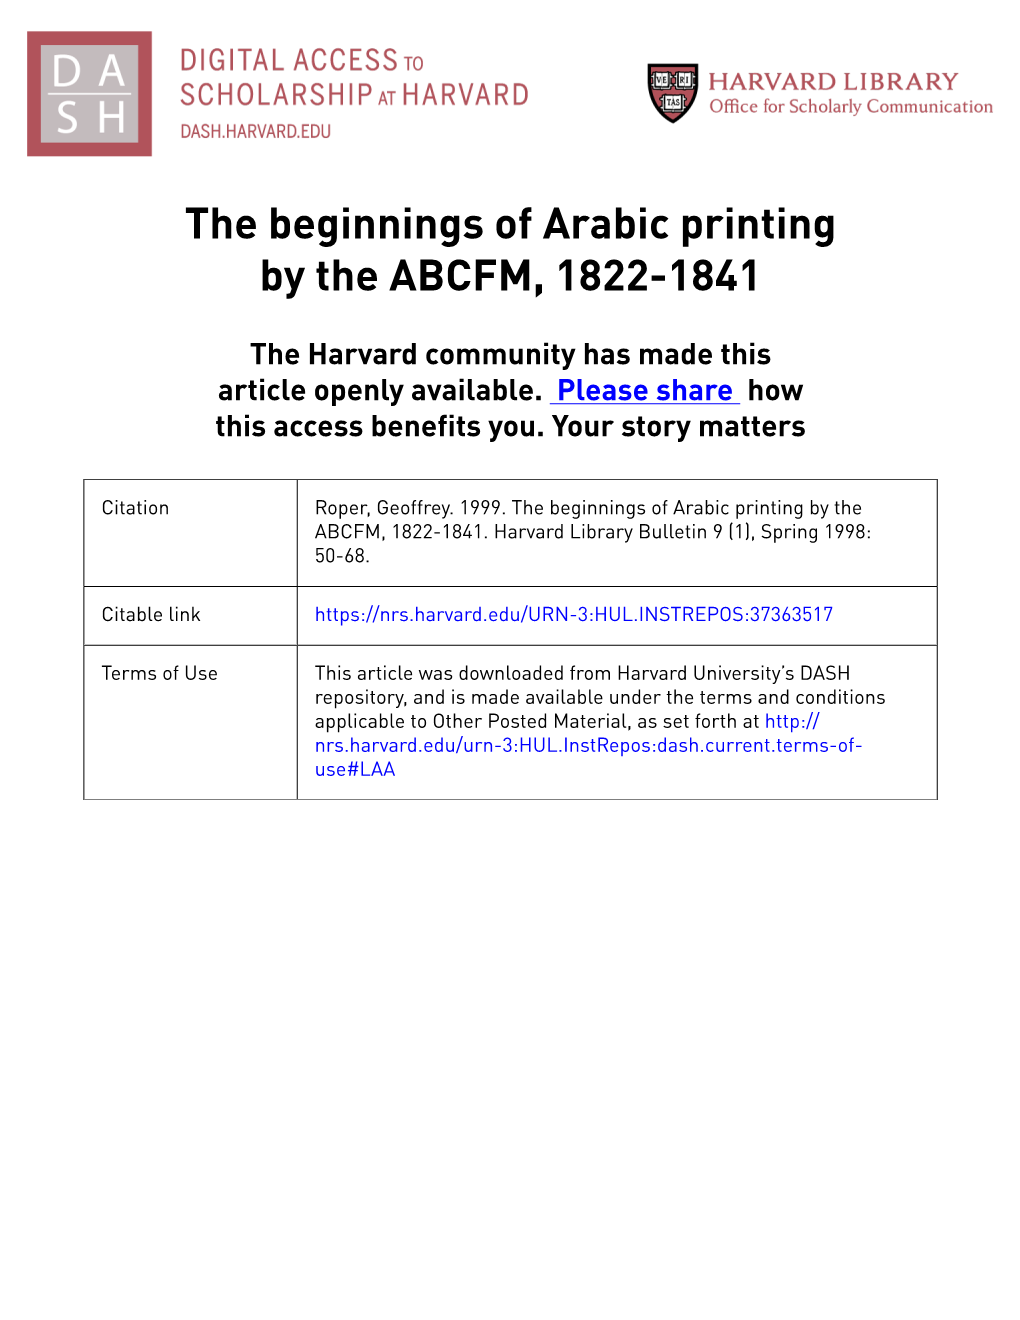 The Beginnings of Arabic Printing by the ABCFM, 1822-1841